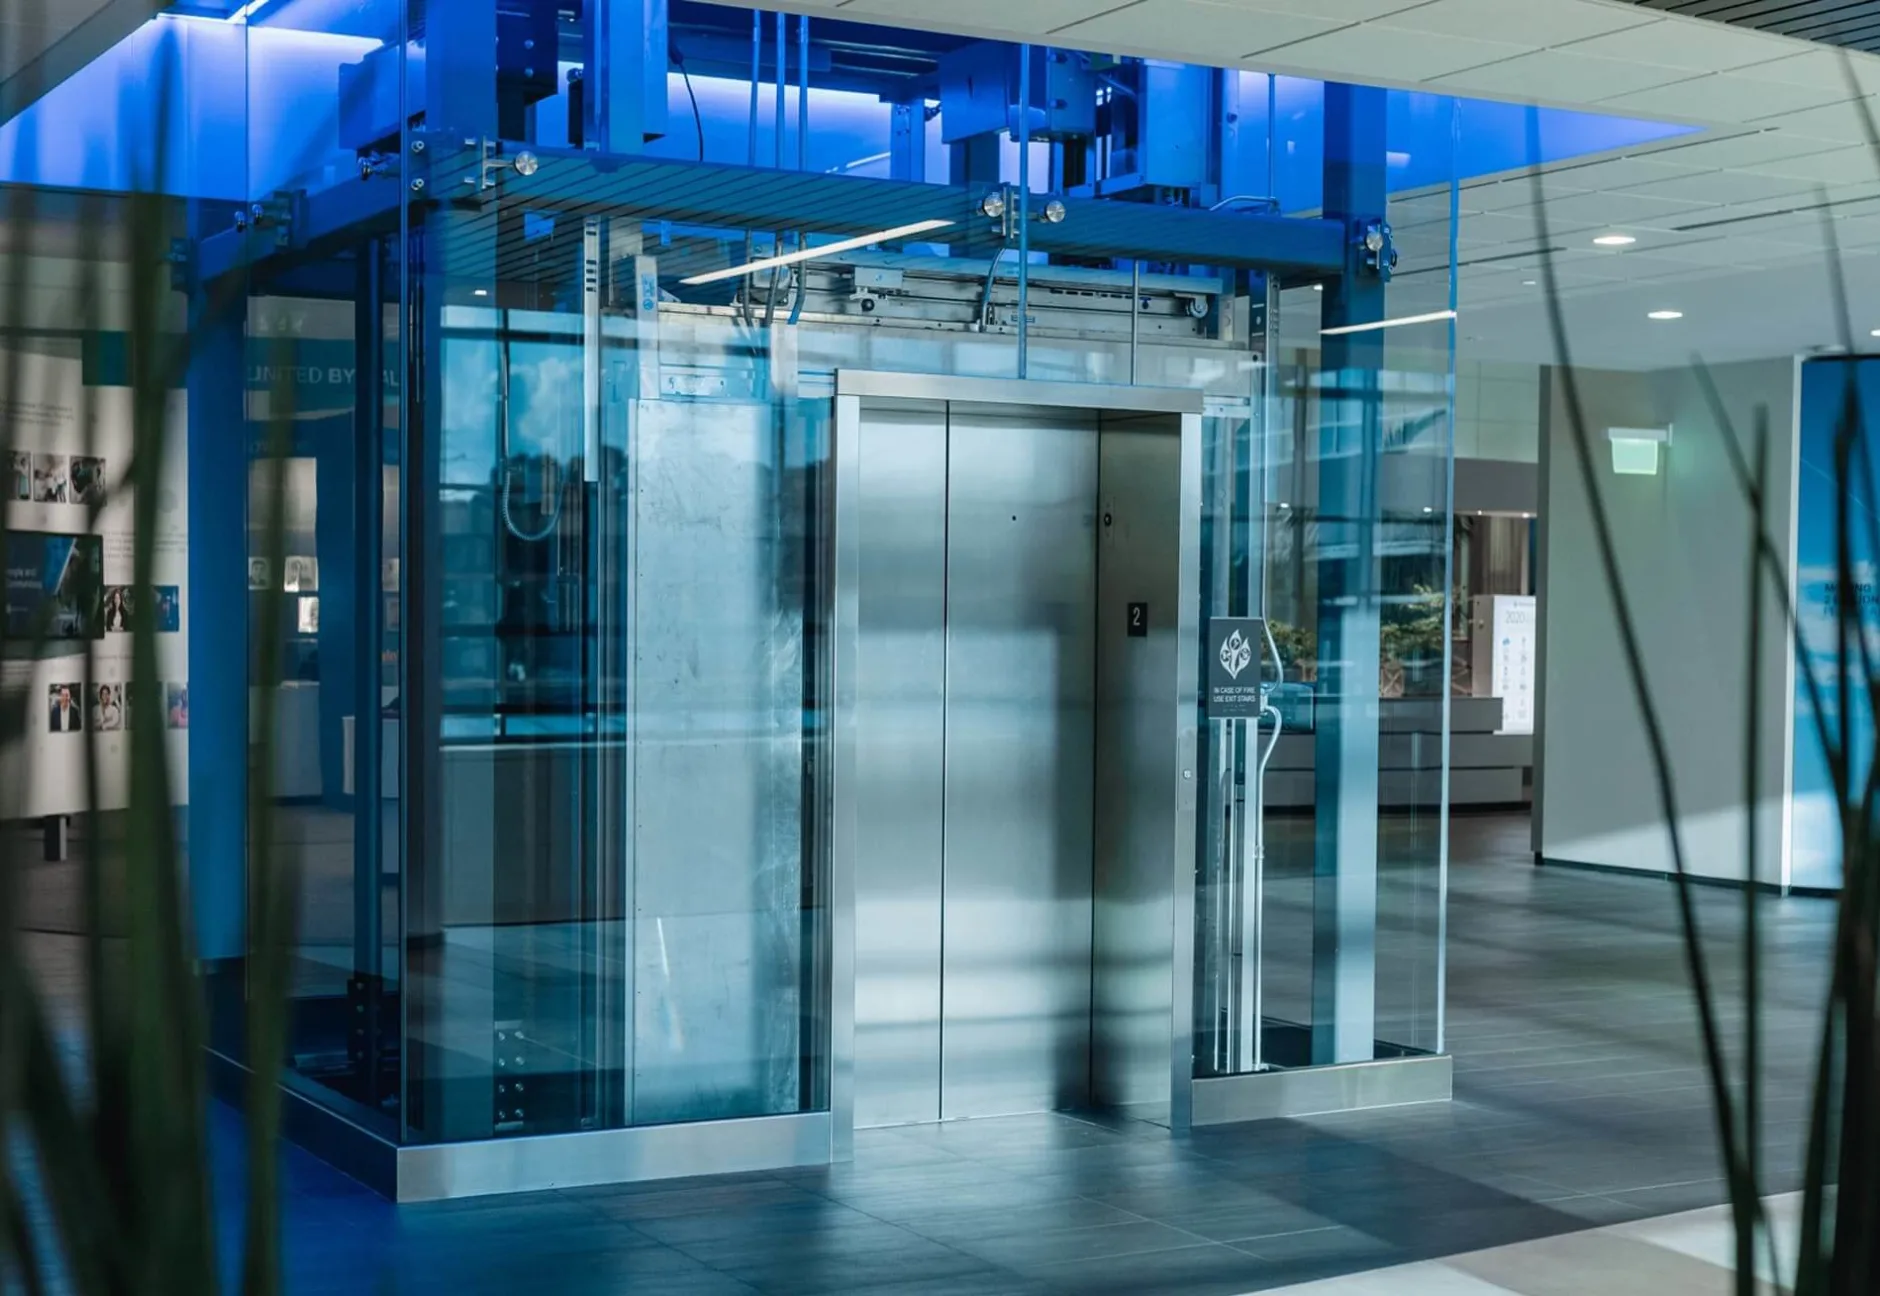 How to find one of the best elevator company for you?